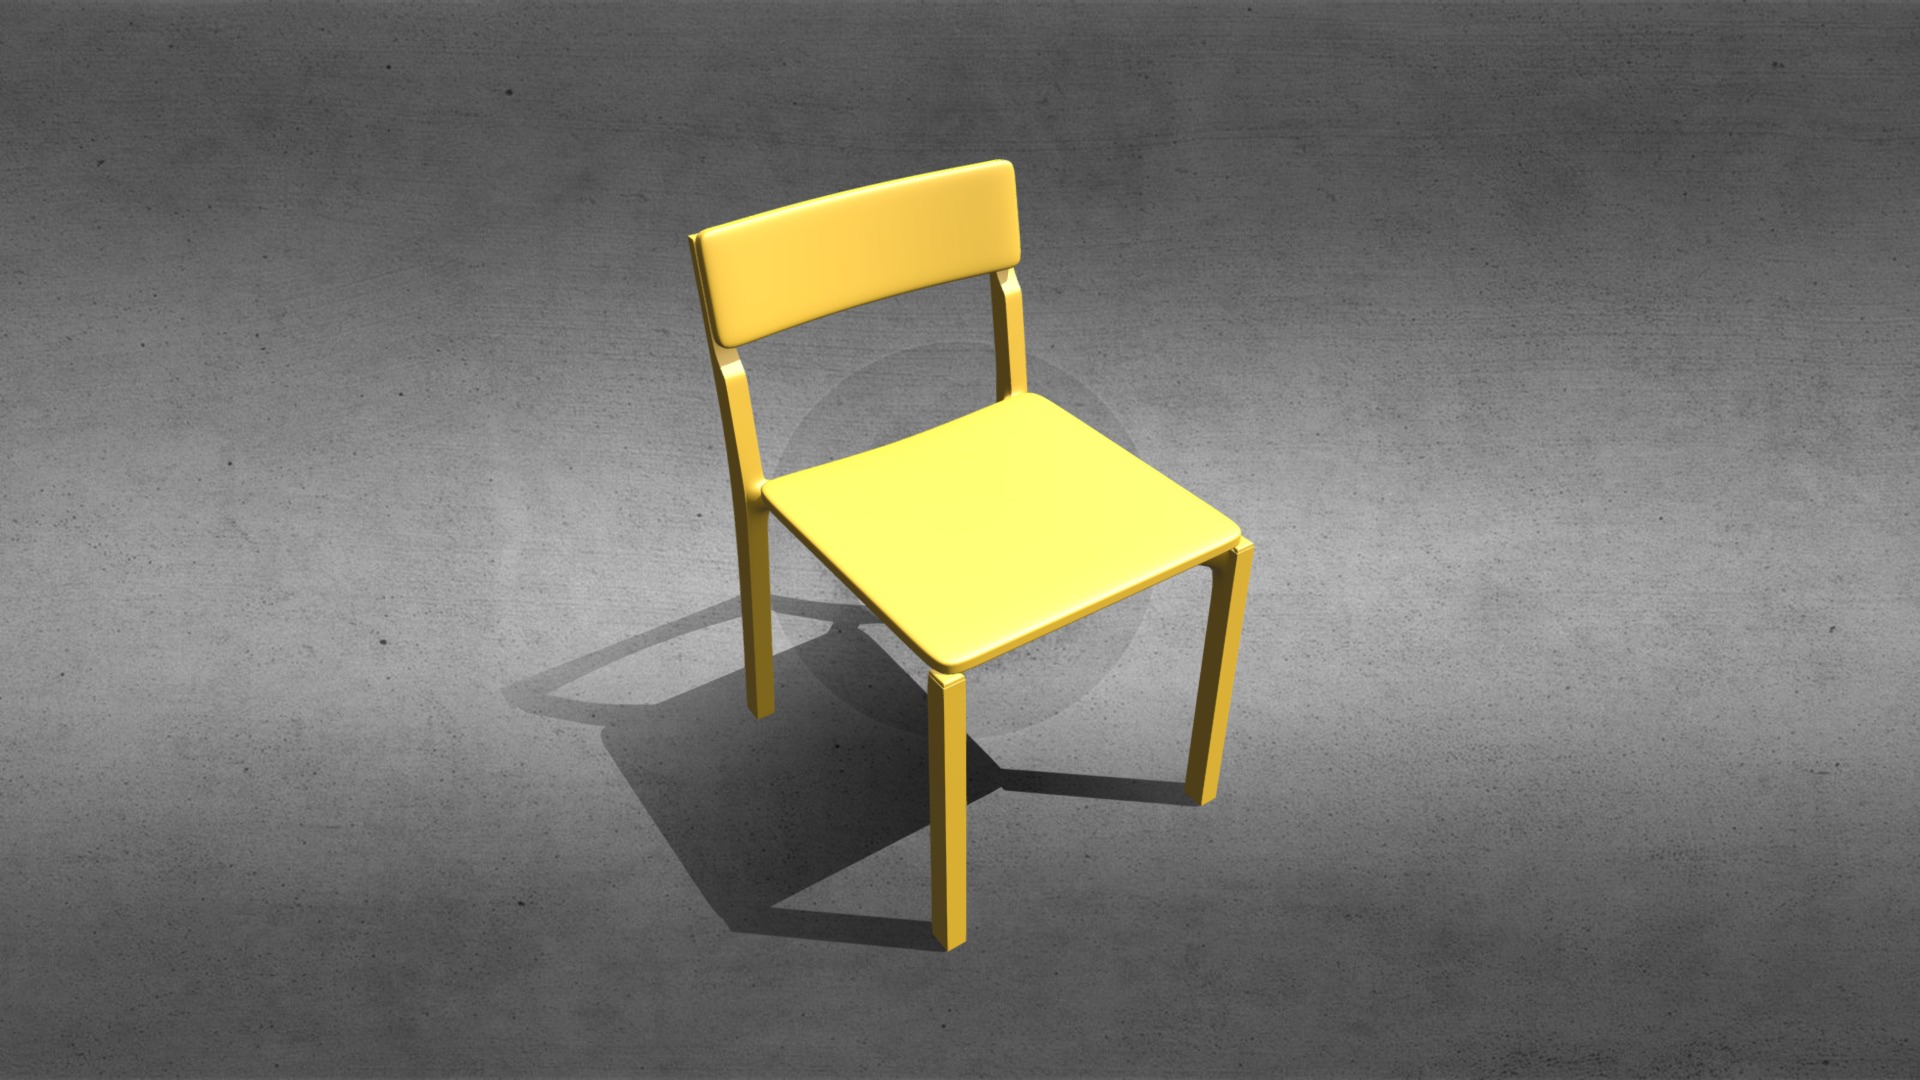 3D model IKEA – Janinge Chair - This is a 3D model of the IKEA - Janinge Chair. The 3D model is about a yellow chair on a concrete surface.